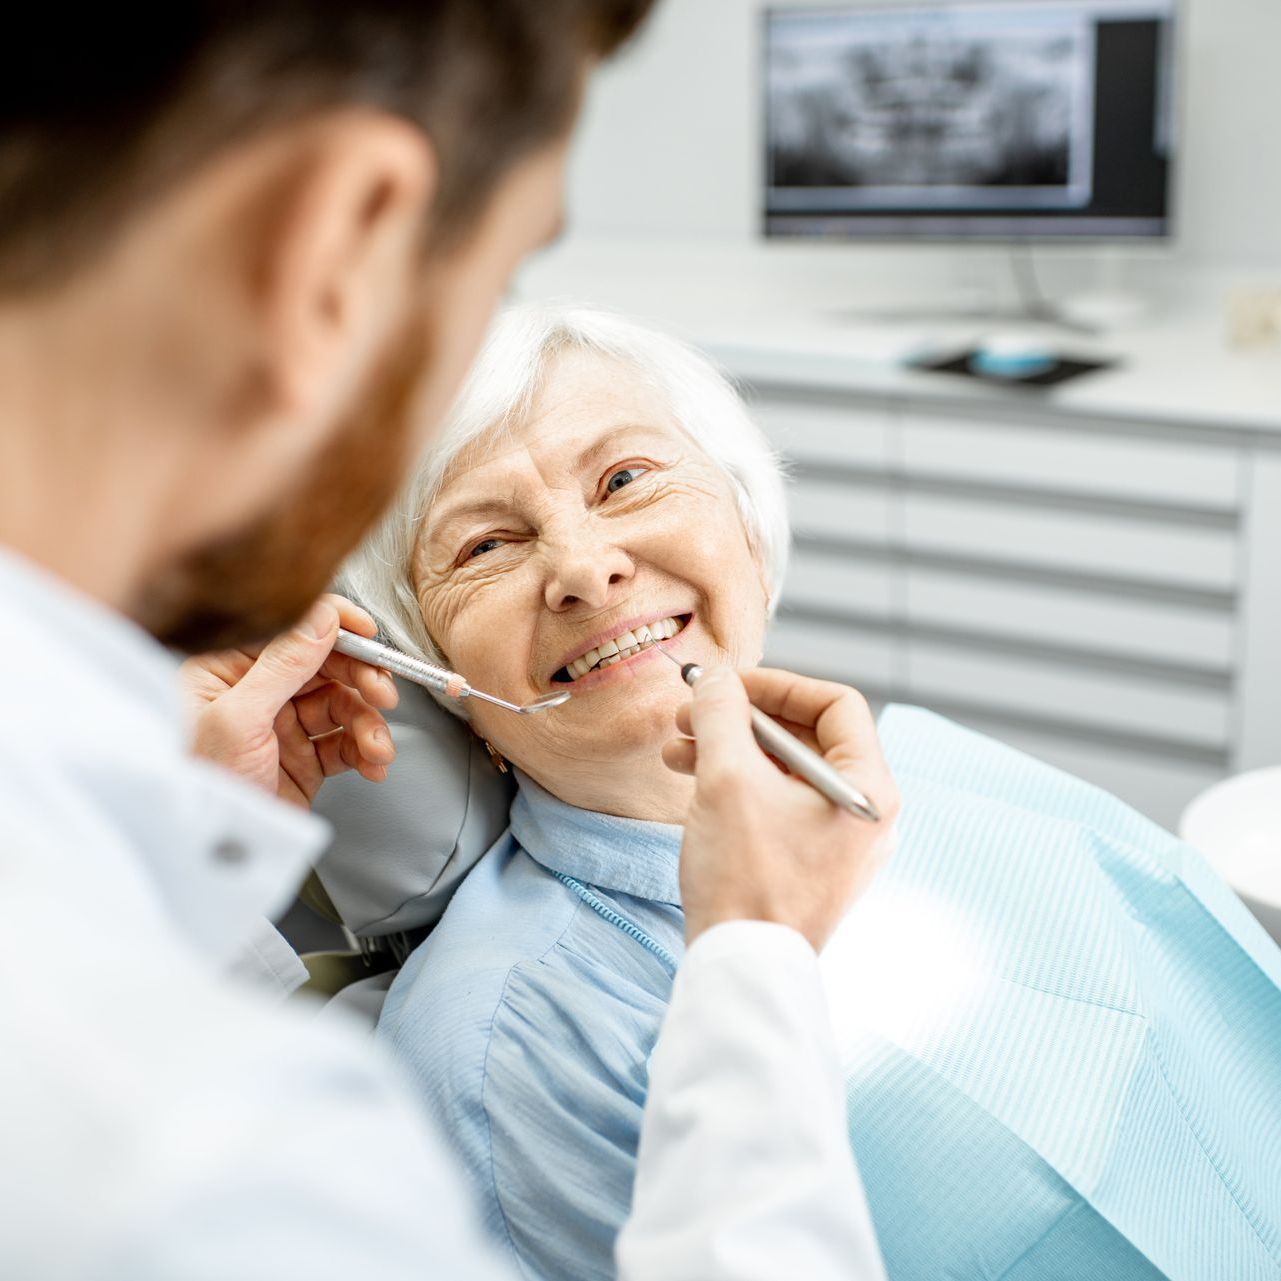 An elderly woman in a dental office smiling at a male dentist